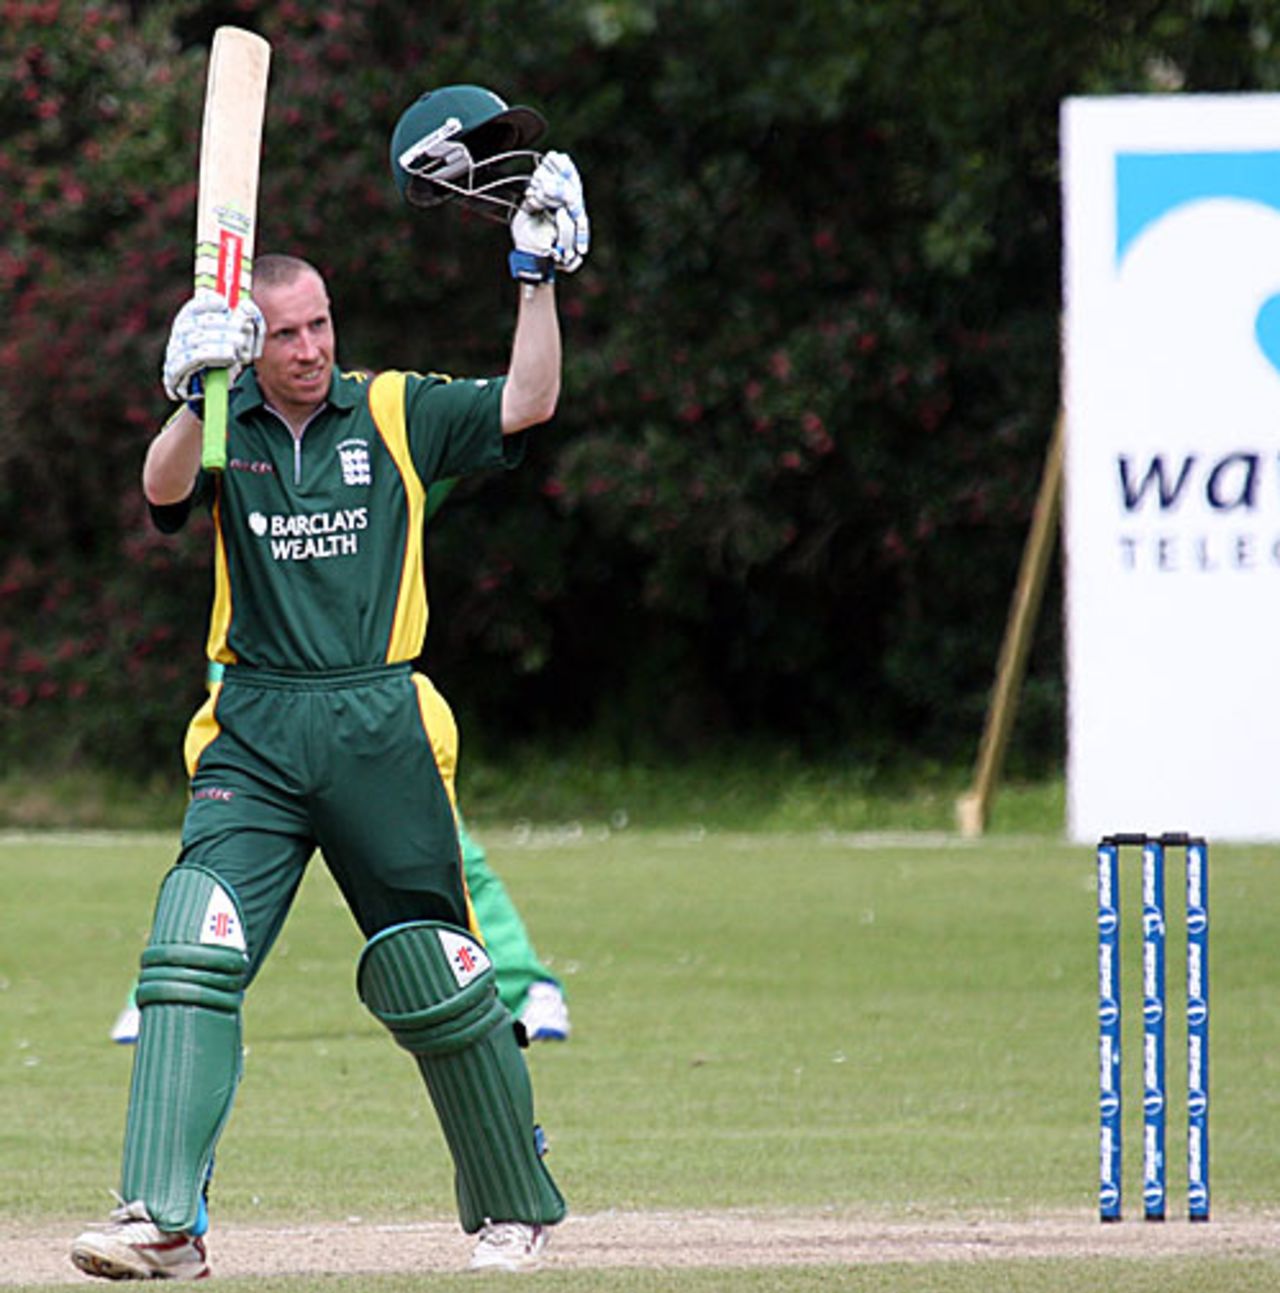 Jeremy Frith celebrates after scoring a century, Guernsey v Suriname, ICC World Cricket League Division Seven, Castel, May 23, 2009